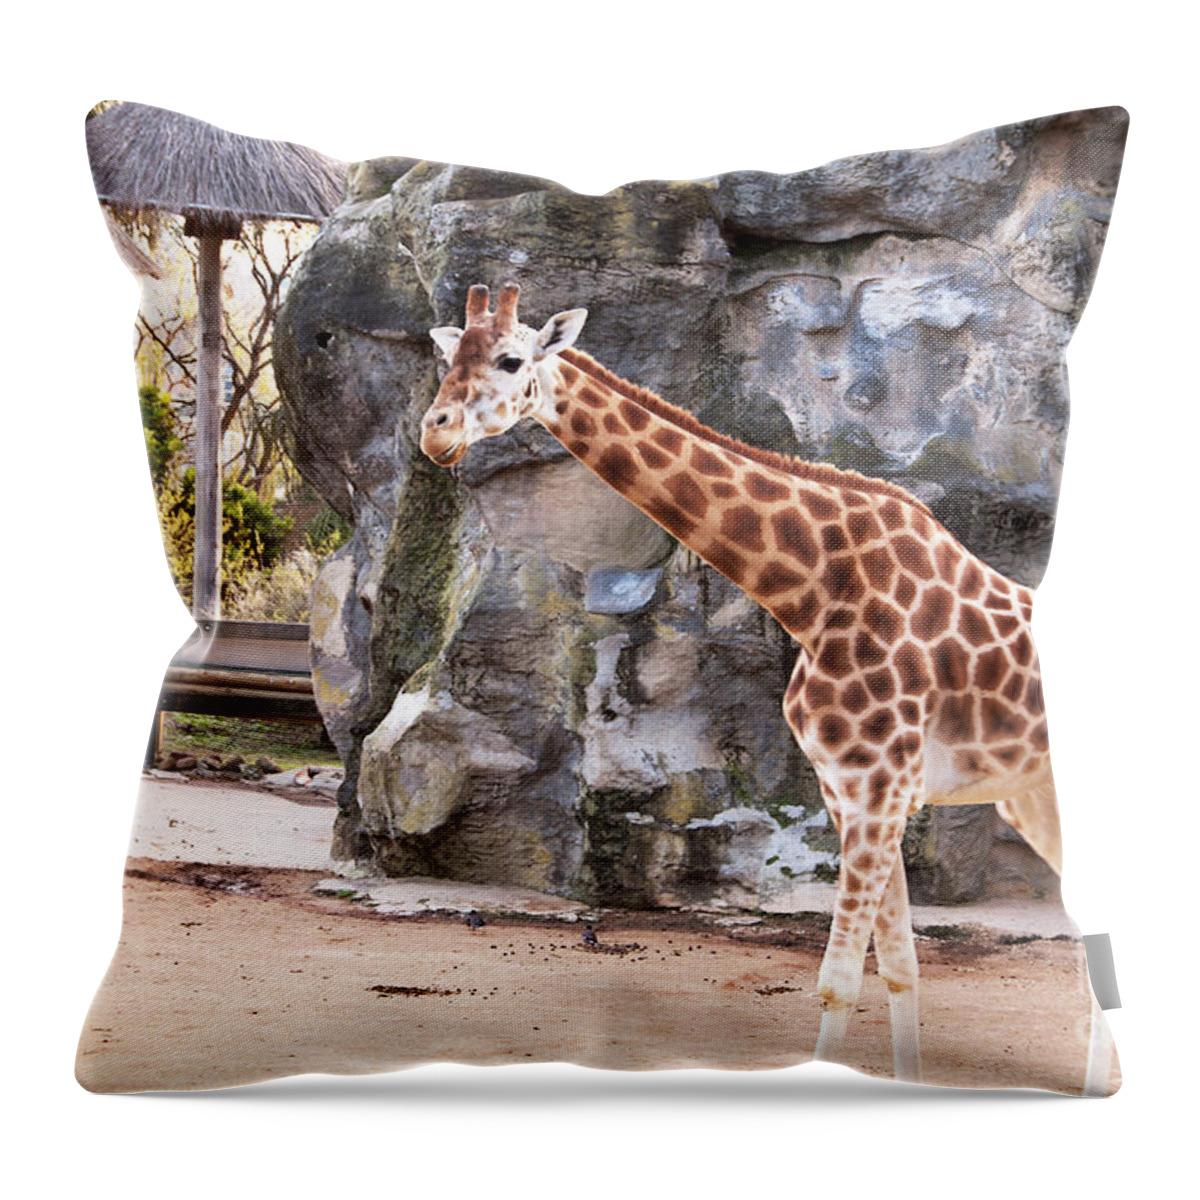 Photograph Throw Pillow featuring the photograph Young Giraffe by Bob and Nancy Kendrick